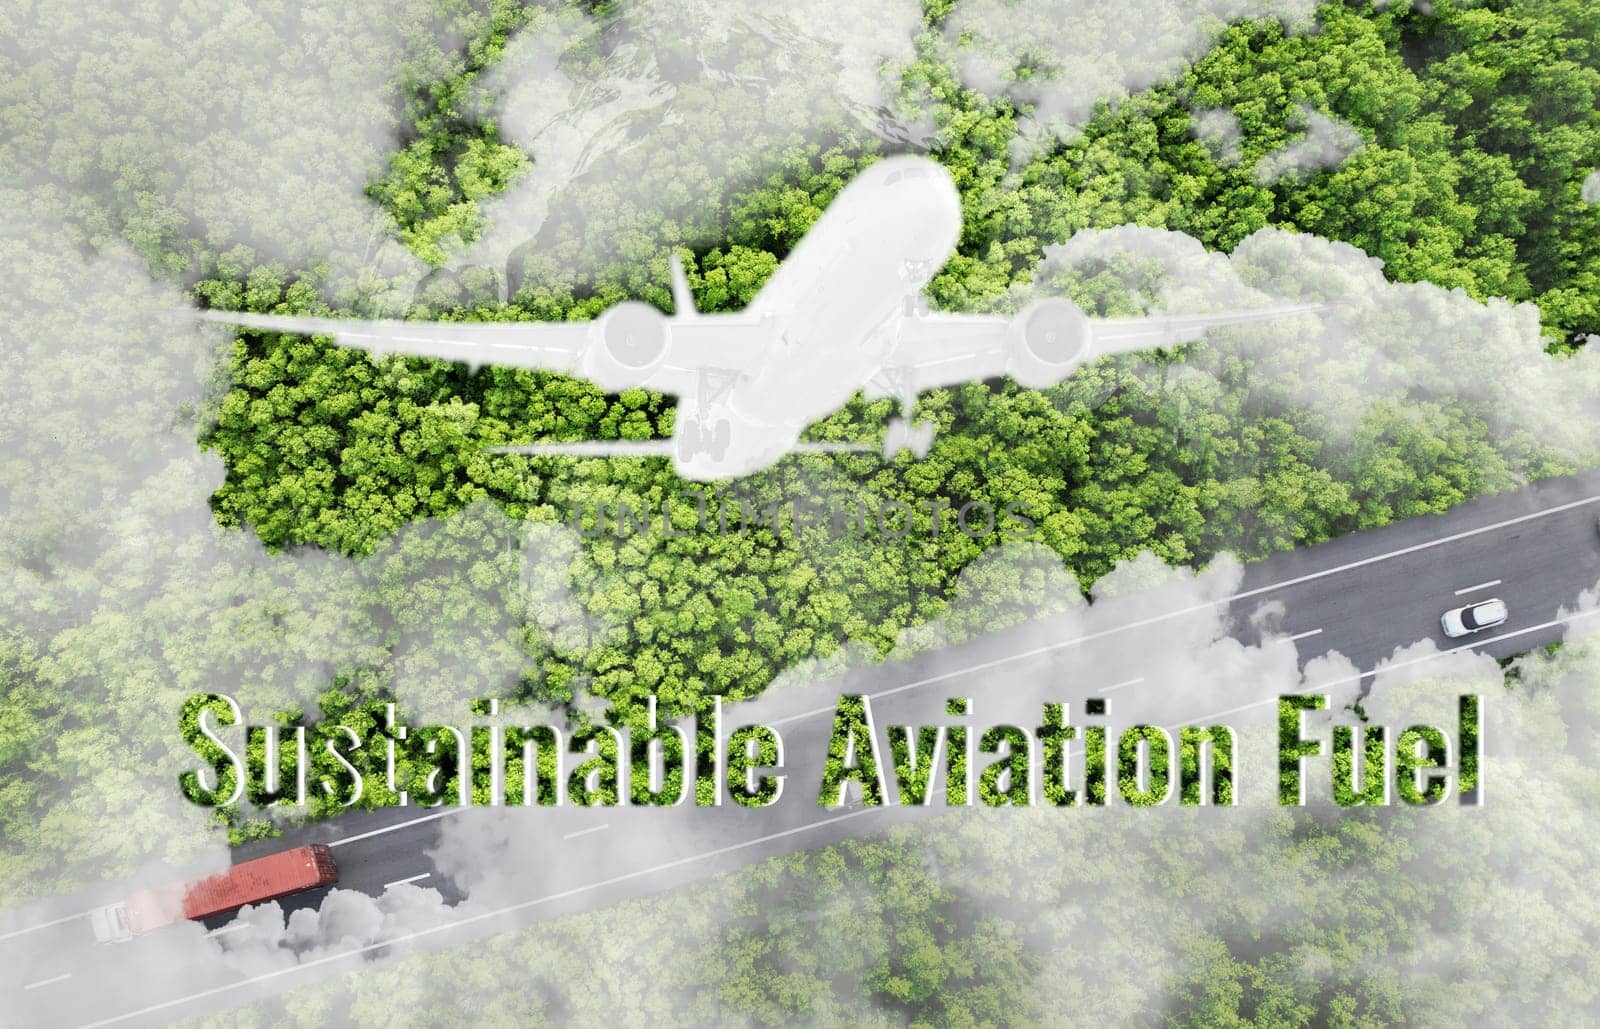 Sustainable aviation fuel concept. Net zero emissions flight. Sustainability transportation. Eco-friendly aviation fuel. Air travel. Future of flight with green innovation. Airplane use biofuel energy by Fahroni